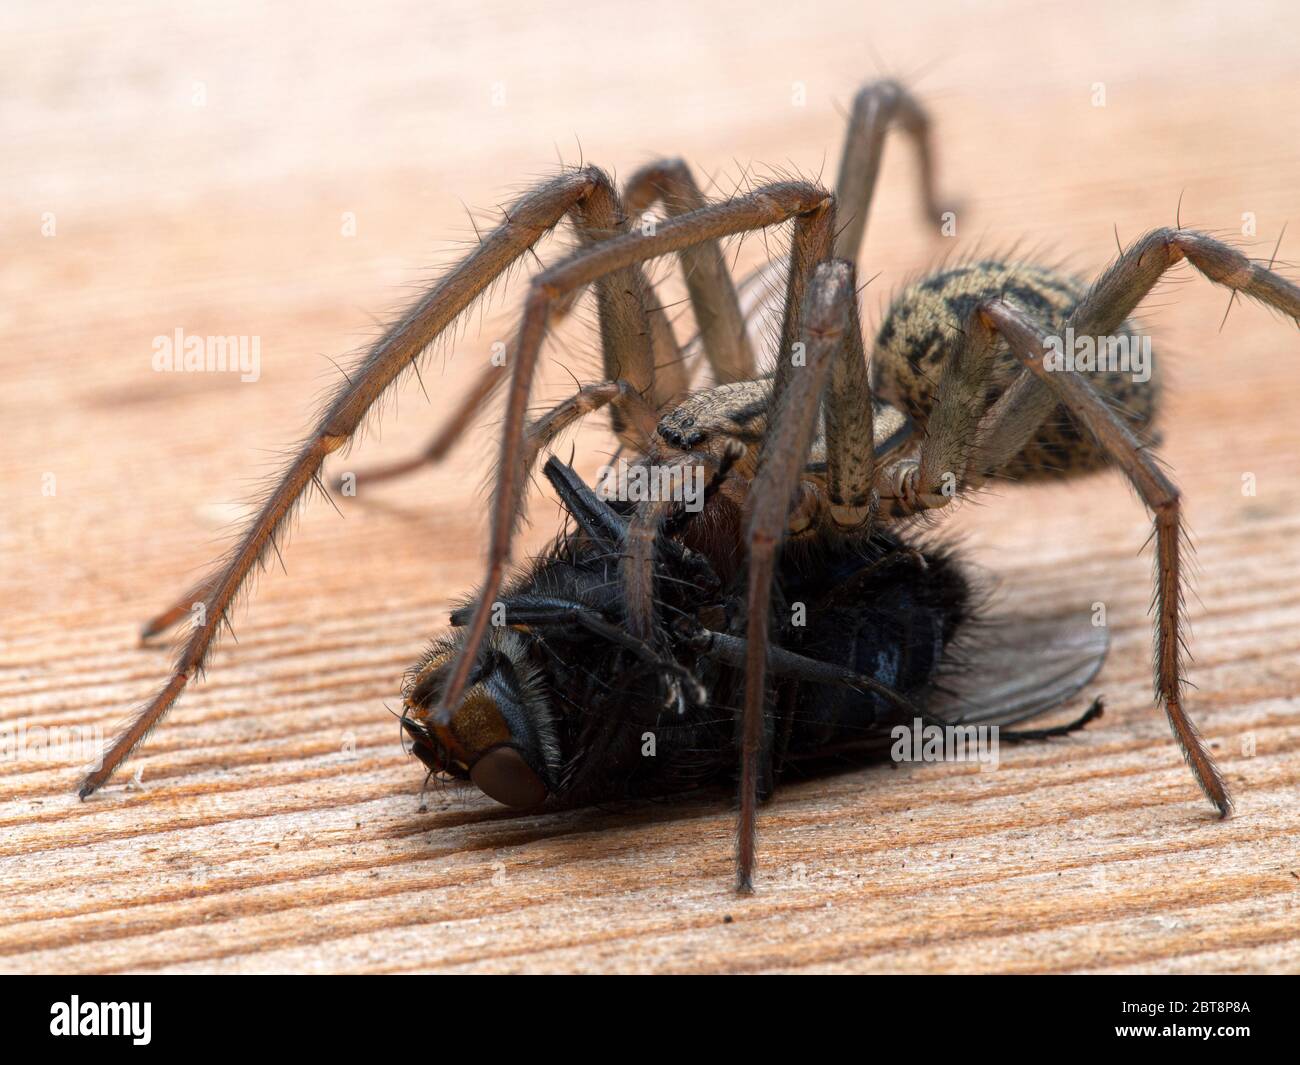 Close-up of a female giant house spider (Eratigena duellica) feeding on a large bluebottle blowfly (Calliphora vicina). Delta, British Columbia, Canad Stock Photo